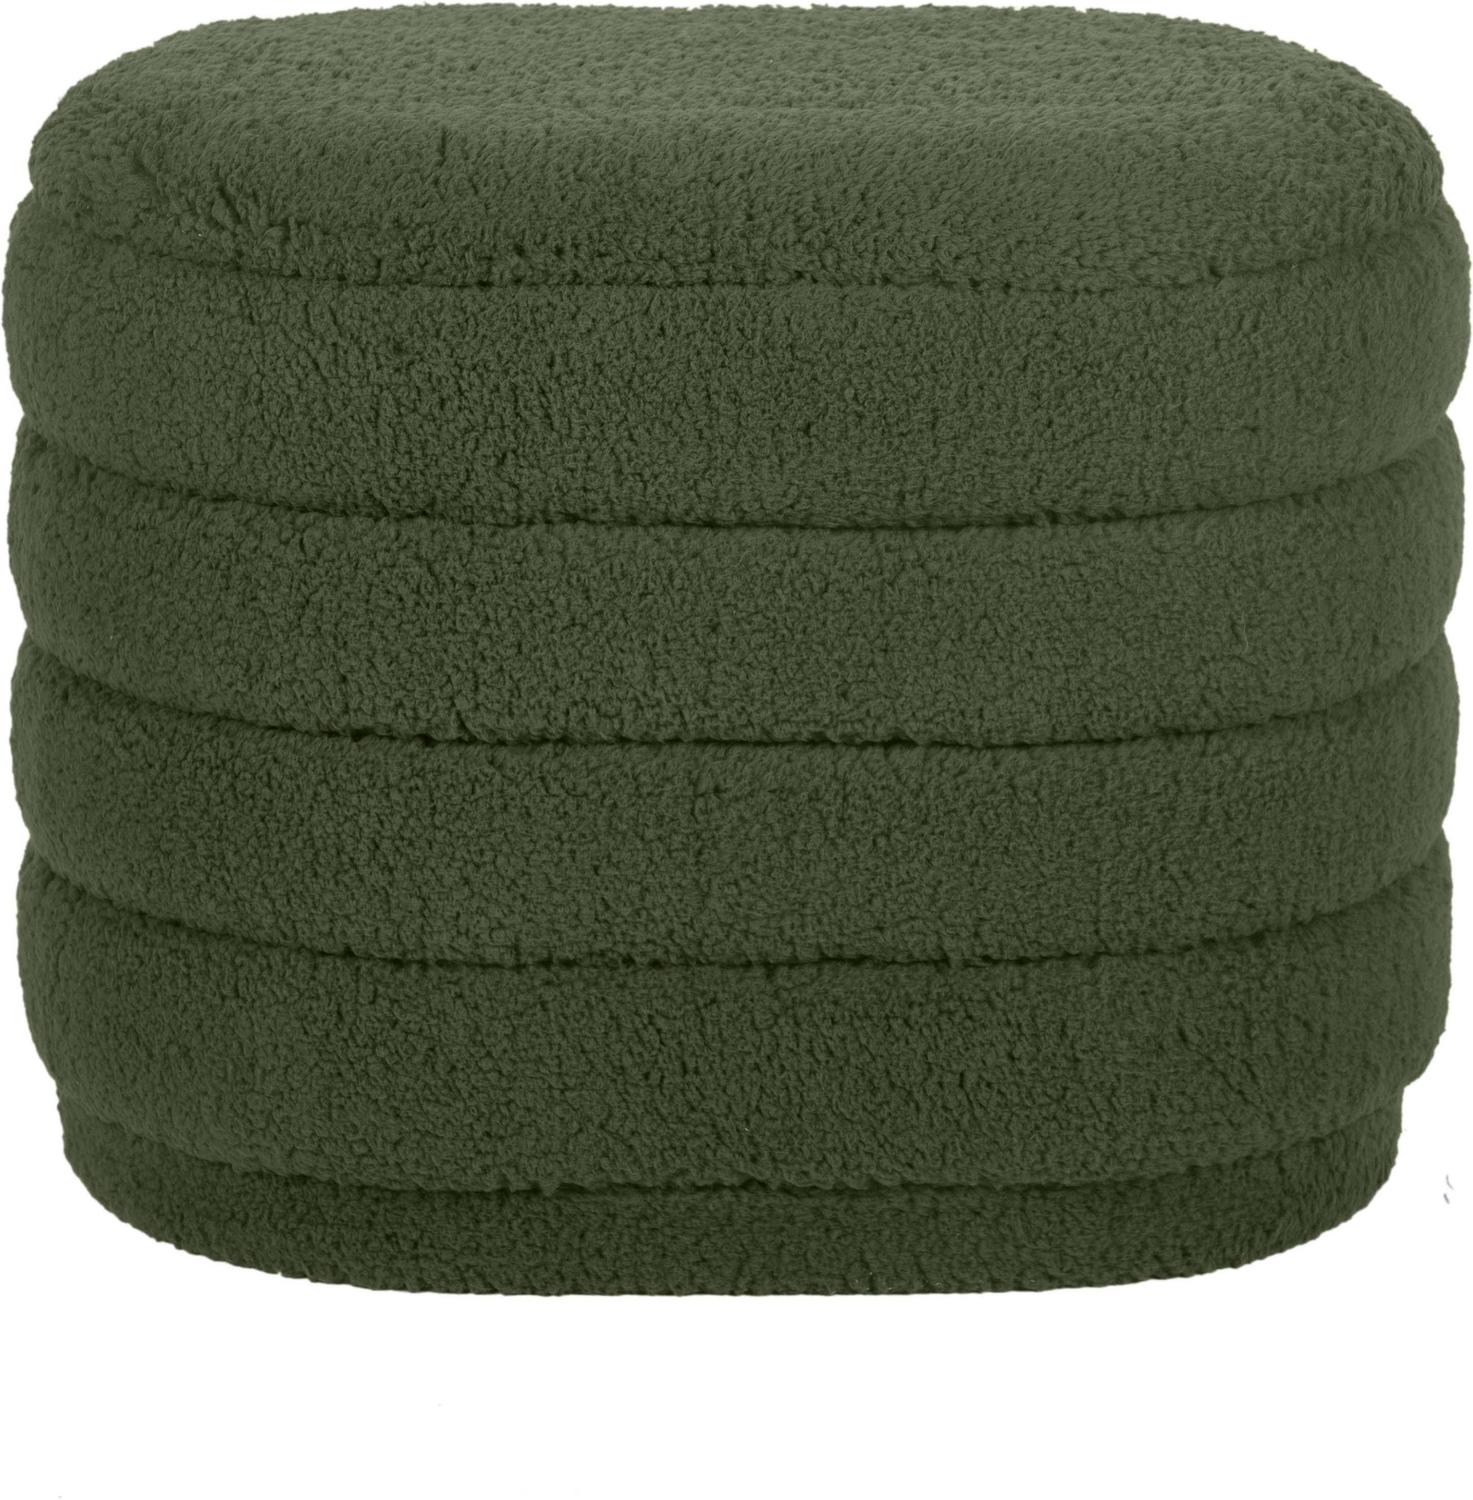 blue accent chairs for sale Contemporary Design Furniture Ottomans Green,Olive